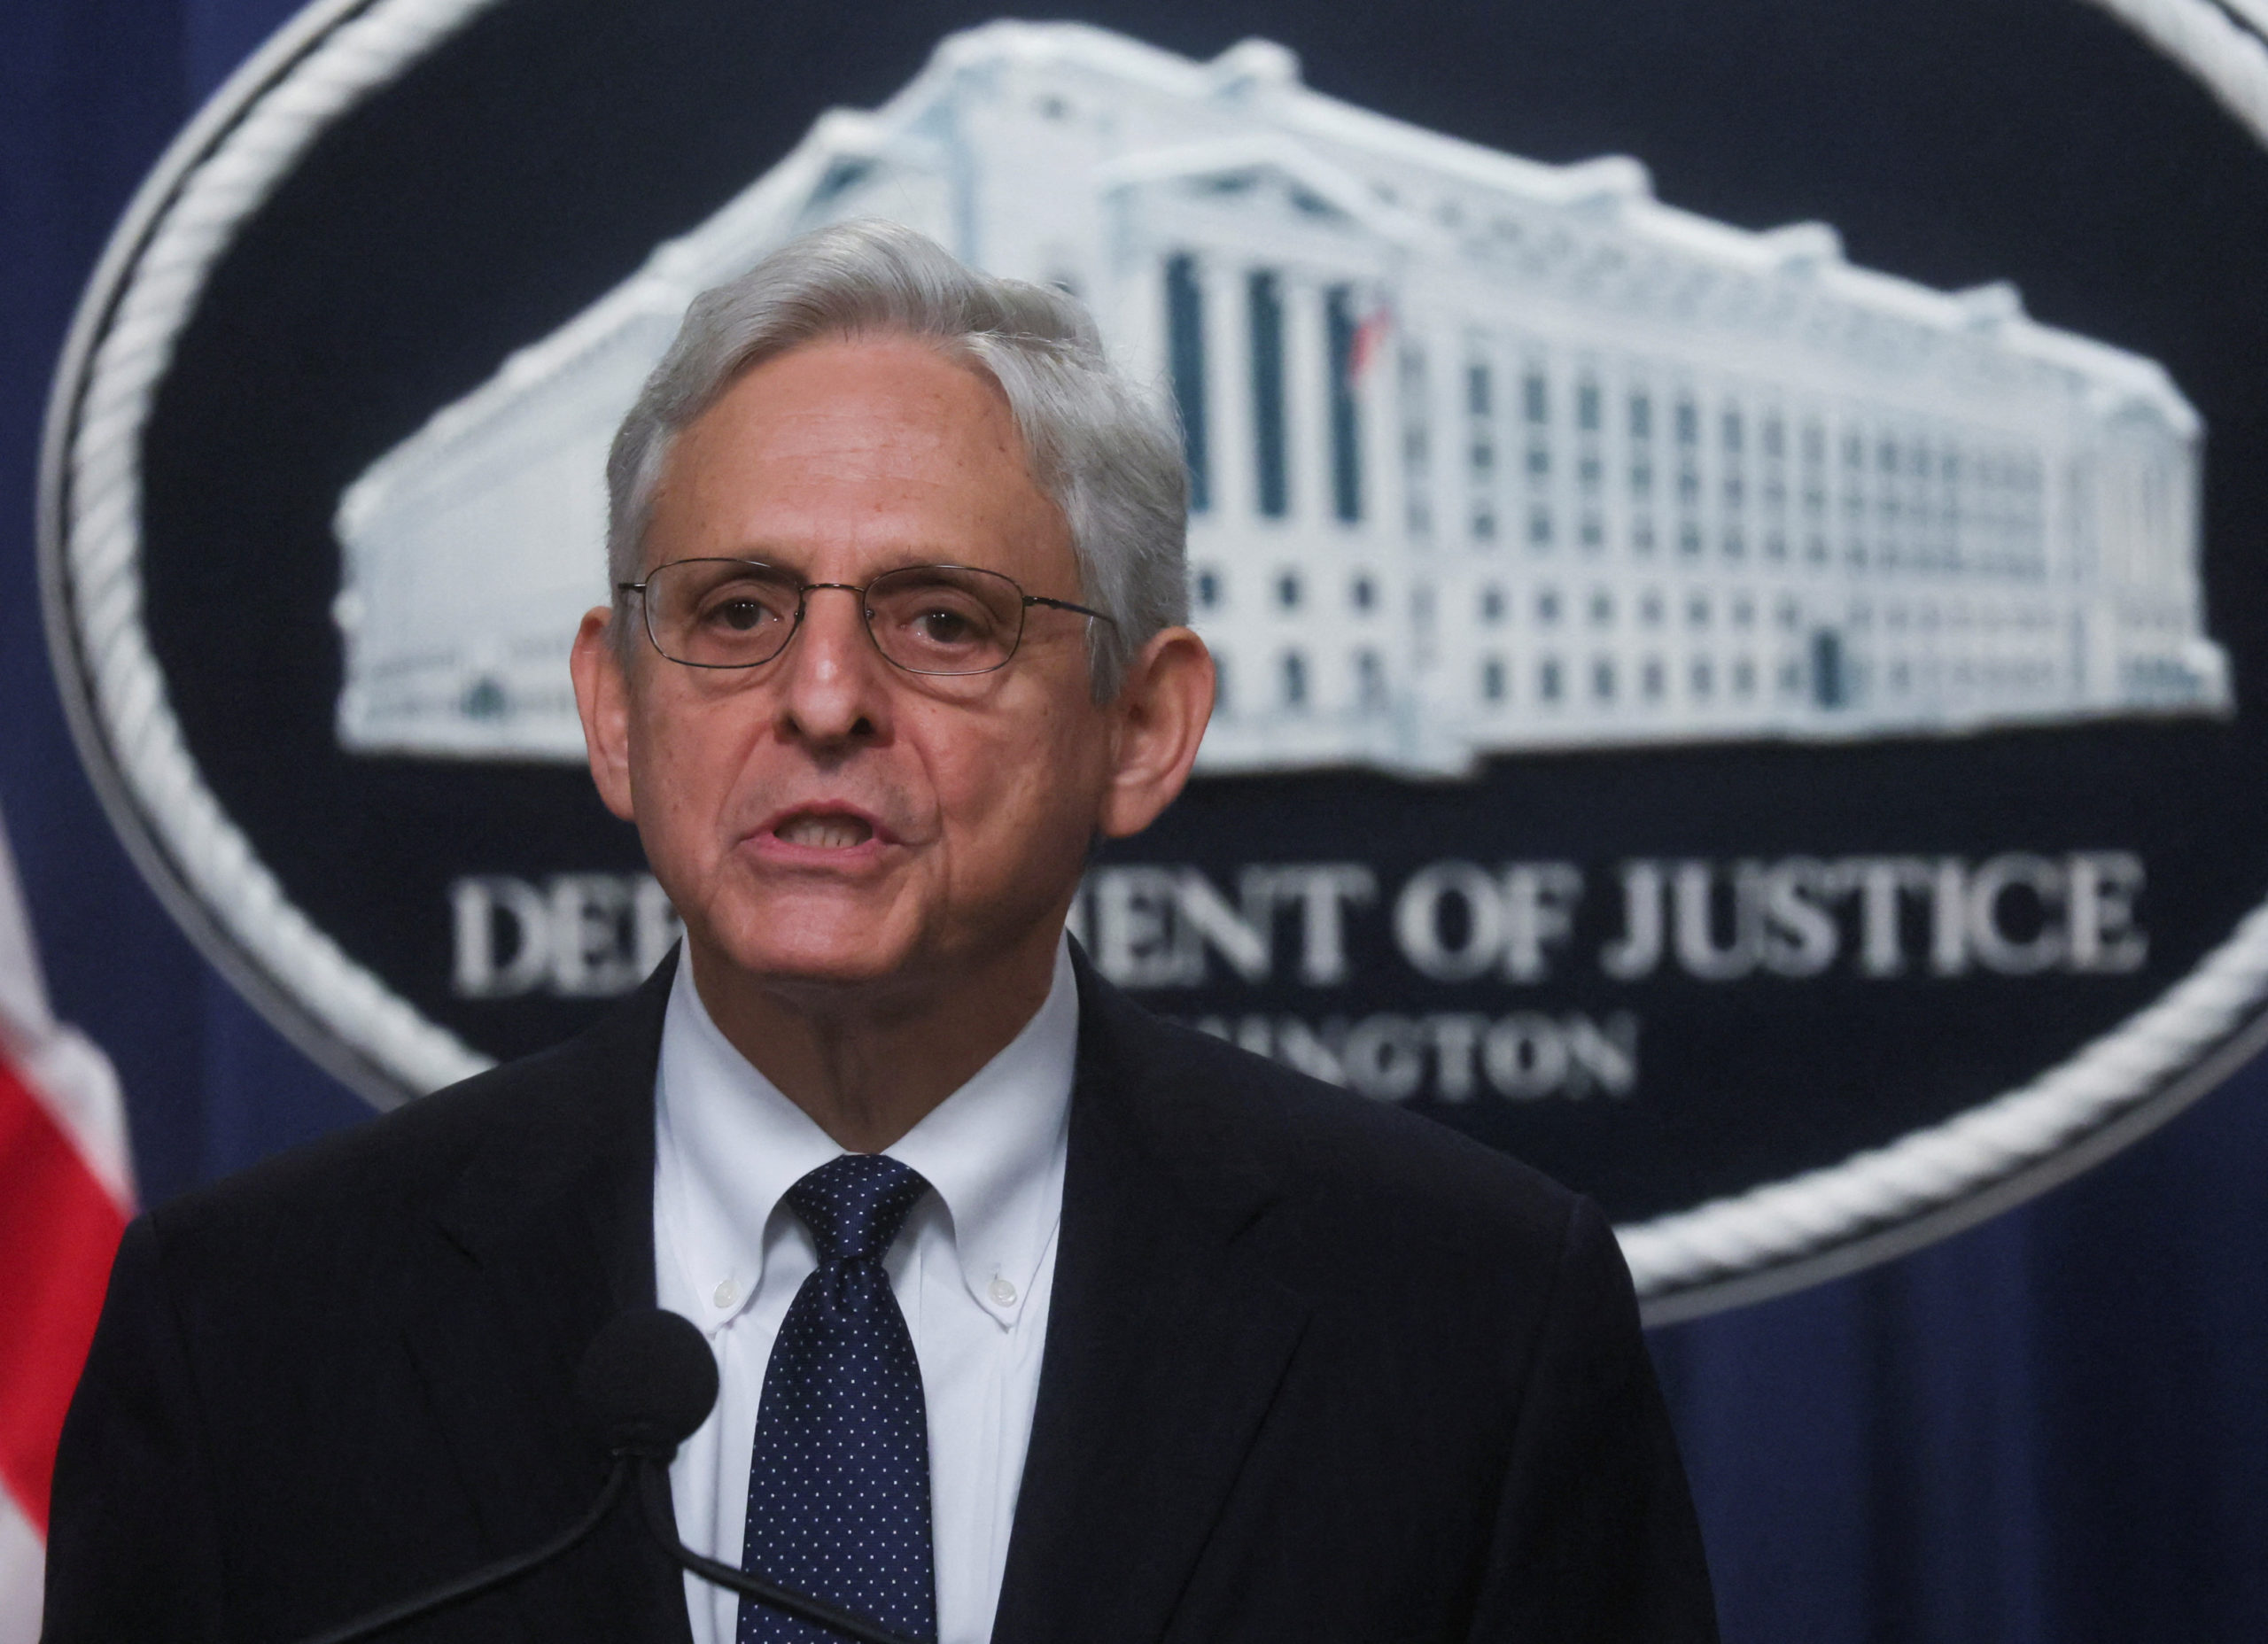 U.S. Attorney General Merrick Garland speaks about the FBI's search warrant served at former President Donald Trump's Mar-a-Lago estate in Florida during a statement at the U.S. Justice Department in Washington, U.S., August 11, 2022. REUTERS/Leah Millis